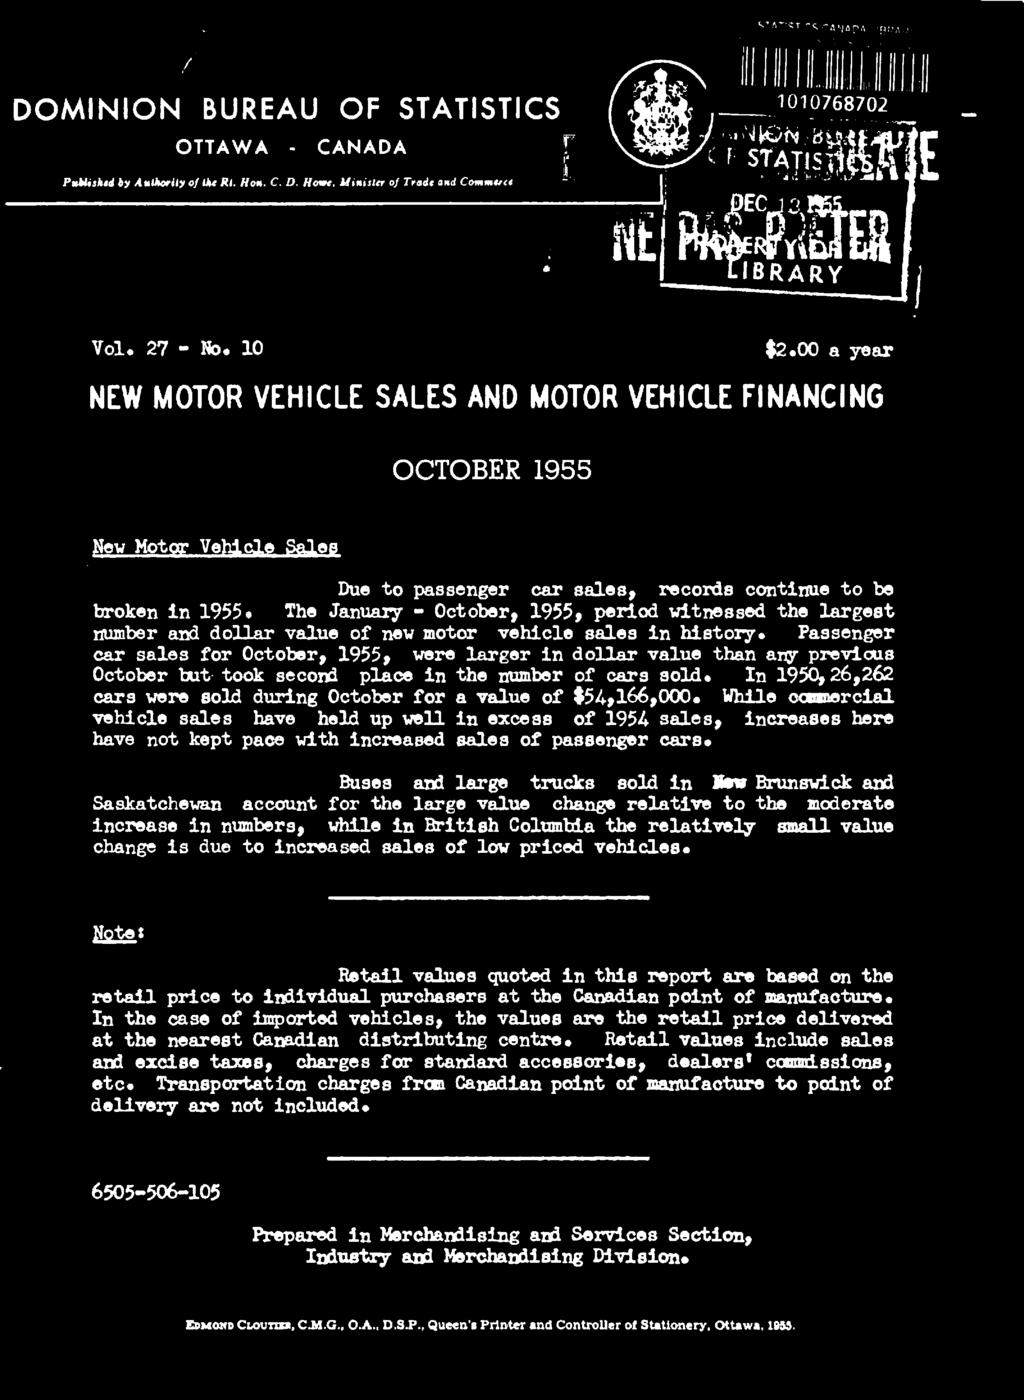 In 1950, 26,262 cars were sold during October for a value of $54 1,166 1,000.